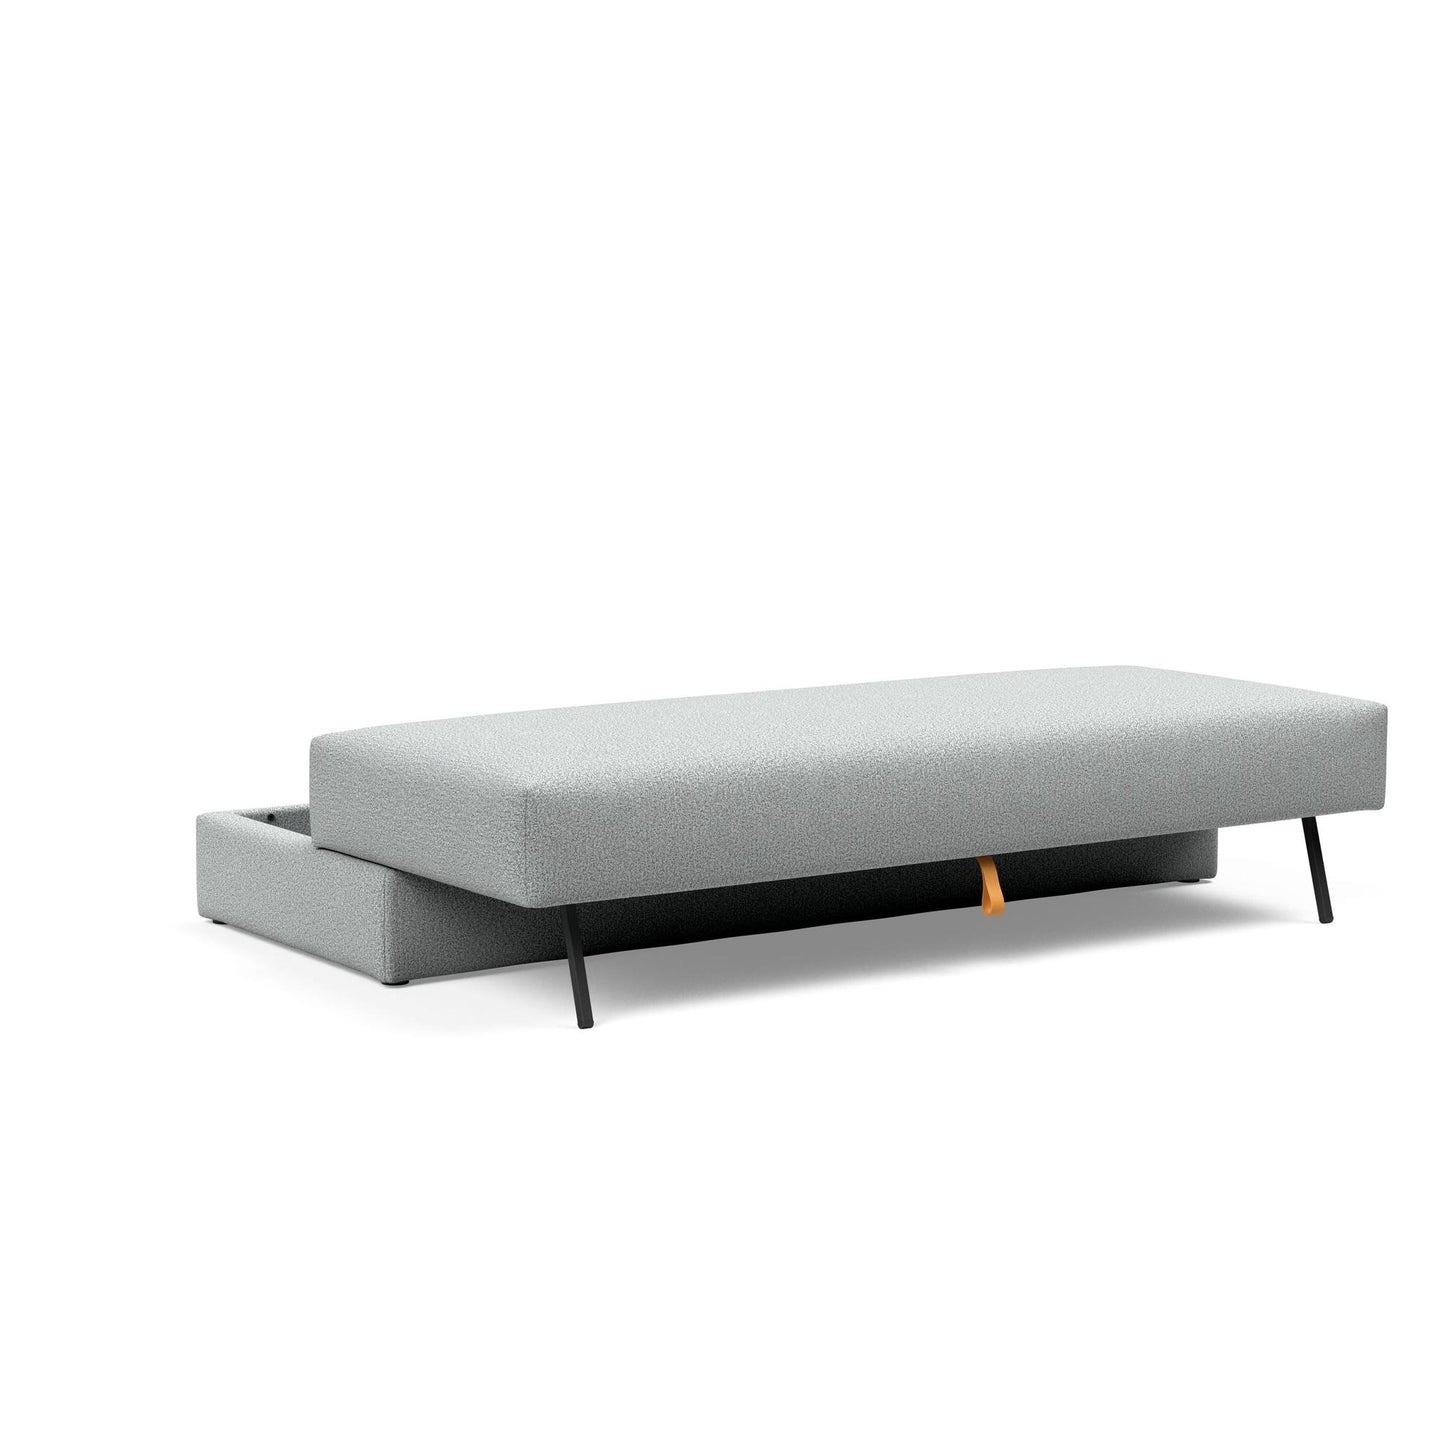 Walis Daybed Sofa Bed in Melange Light Gray